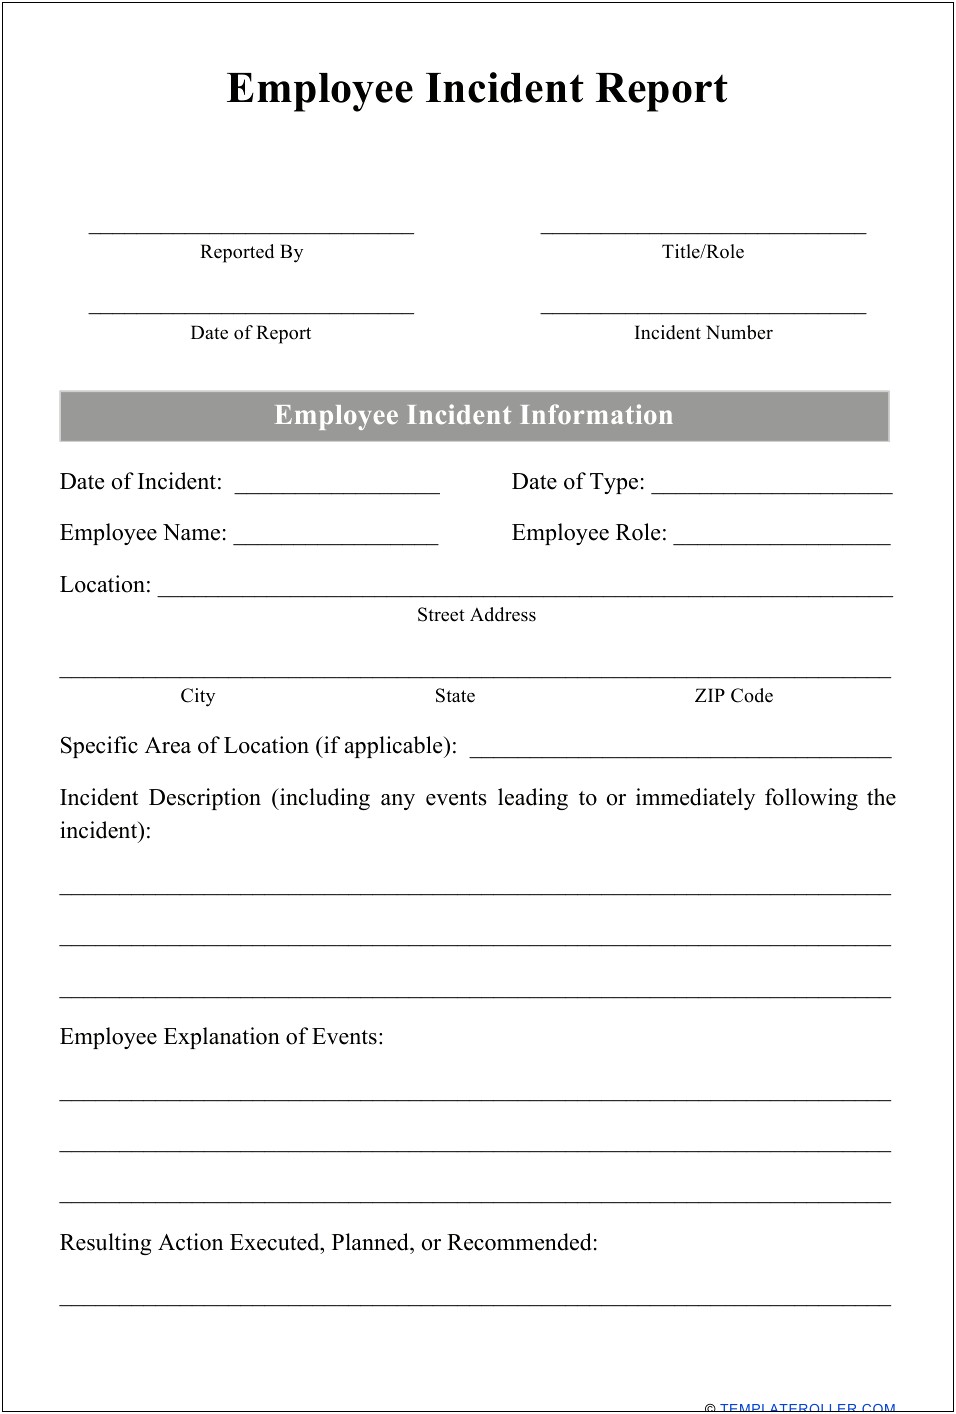 Free Vehicle Accident Report Form Template